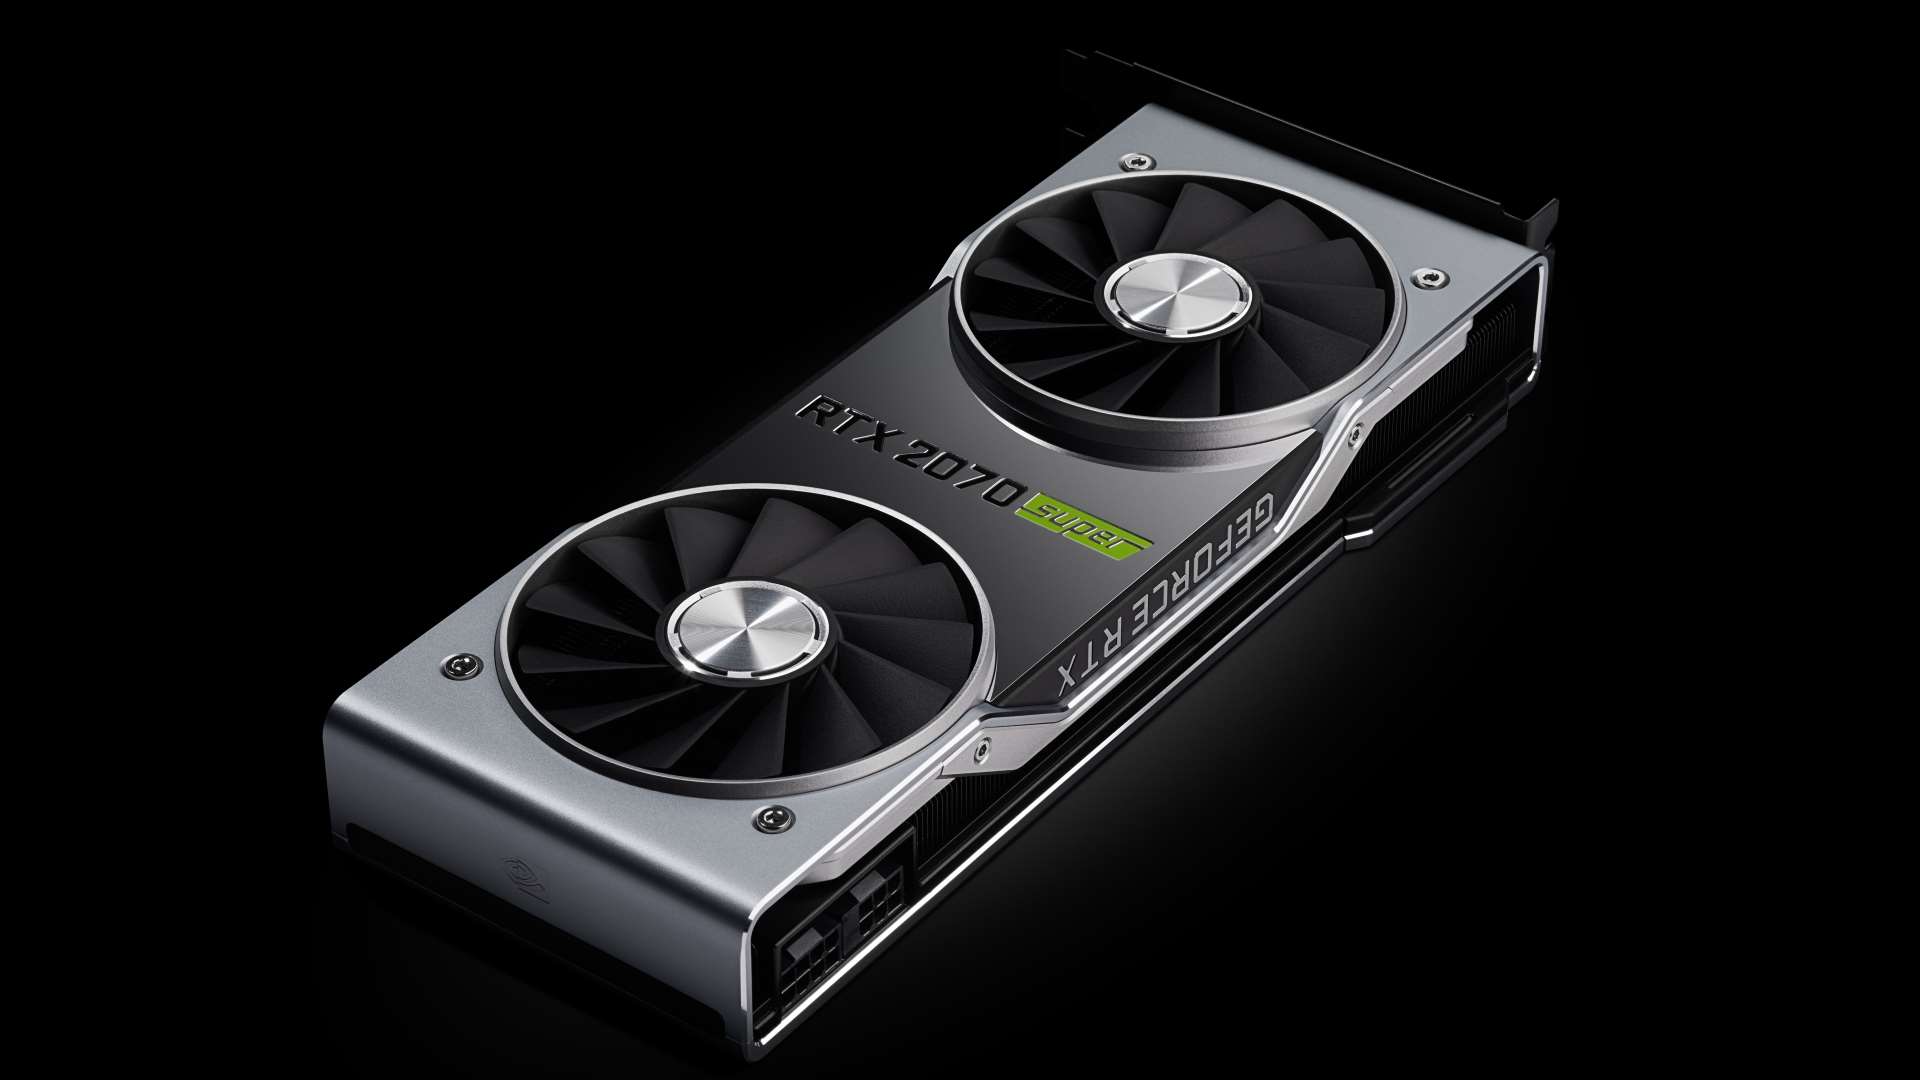 Nvidia Rtx 70 Super Review The Rx 5700 Xt Runs It Close But Geforce Just Has The Edge Pcgamesn